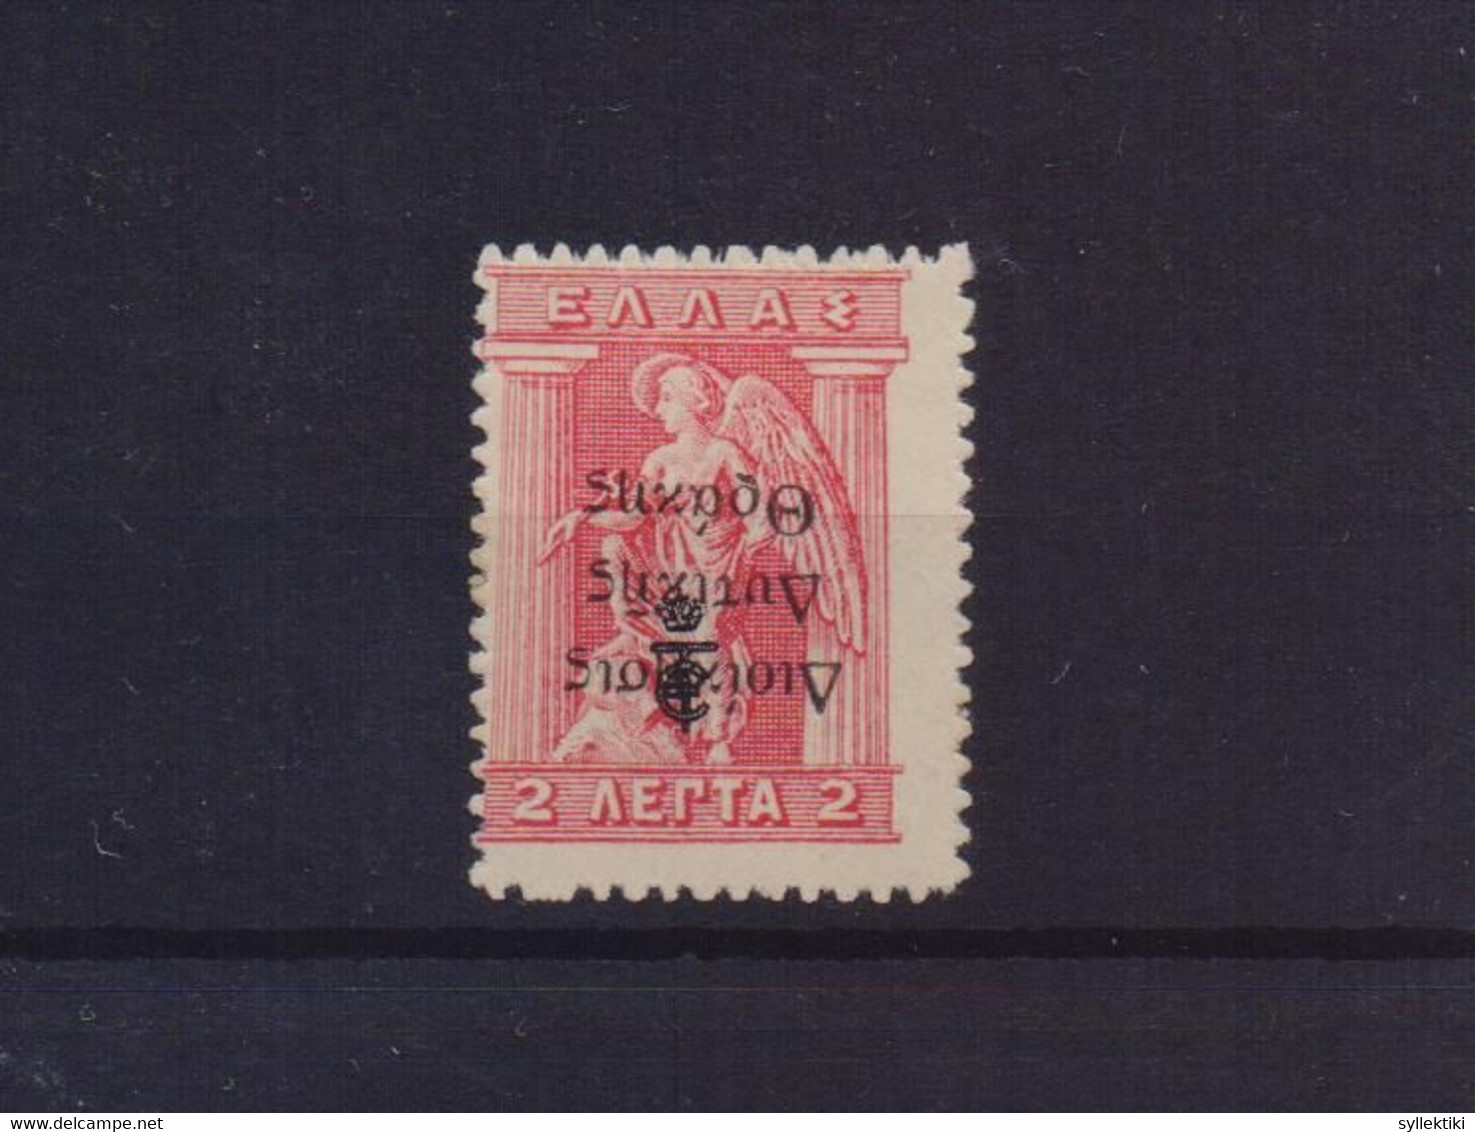 GREECE 1920 WESTERN THRACE ADMIN. INVERTED OVERPRINT 2 LEPTA E.T.  MH STAMP - Thrace